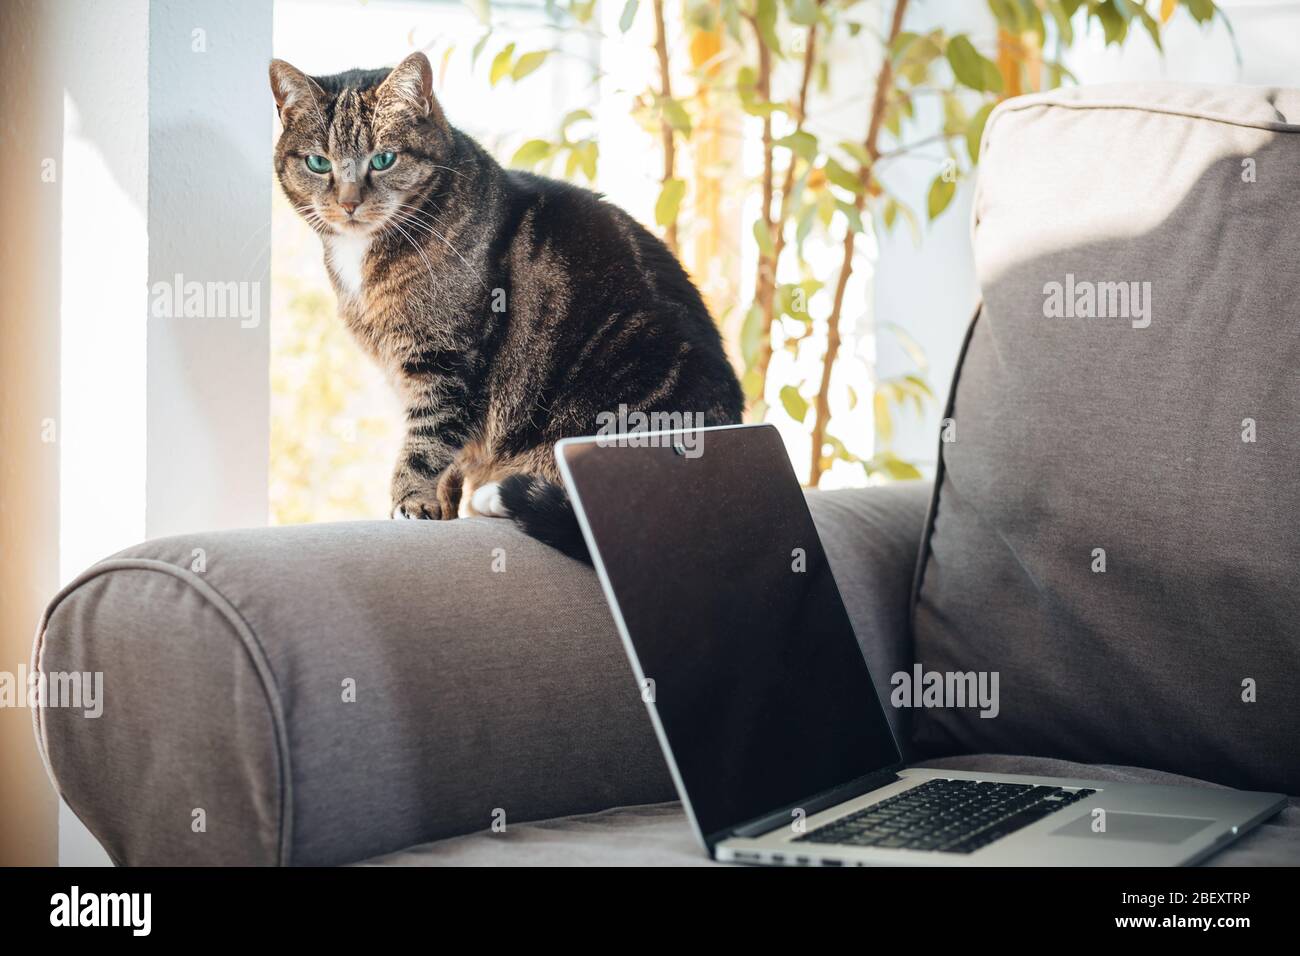 Cat on a sofa next to a laptop Stock Photo